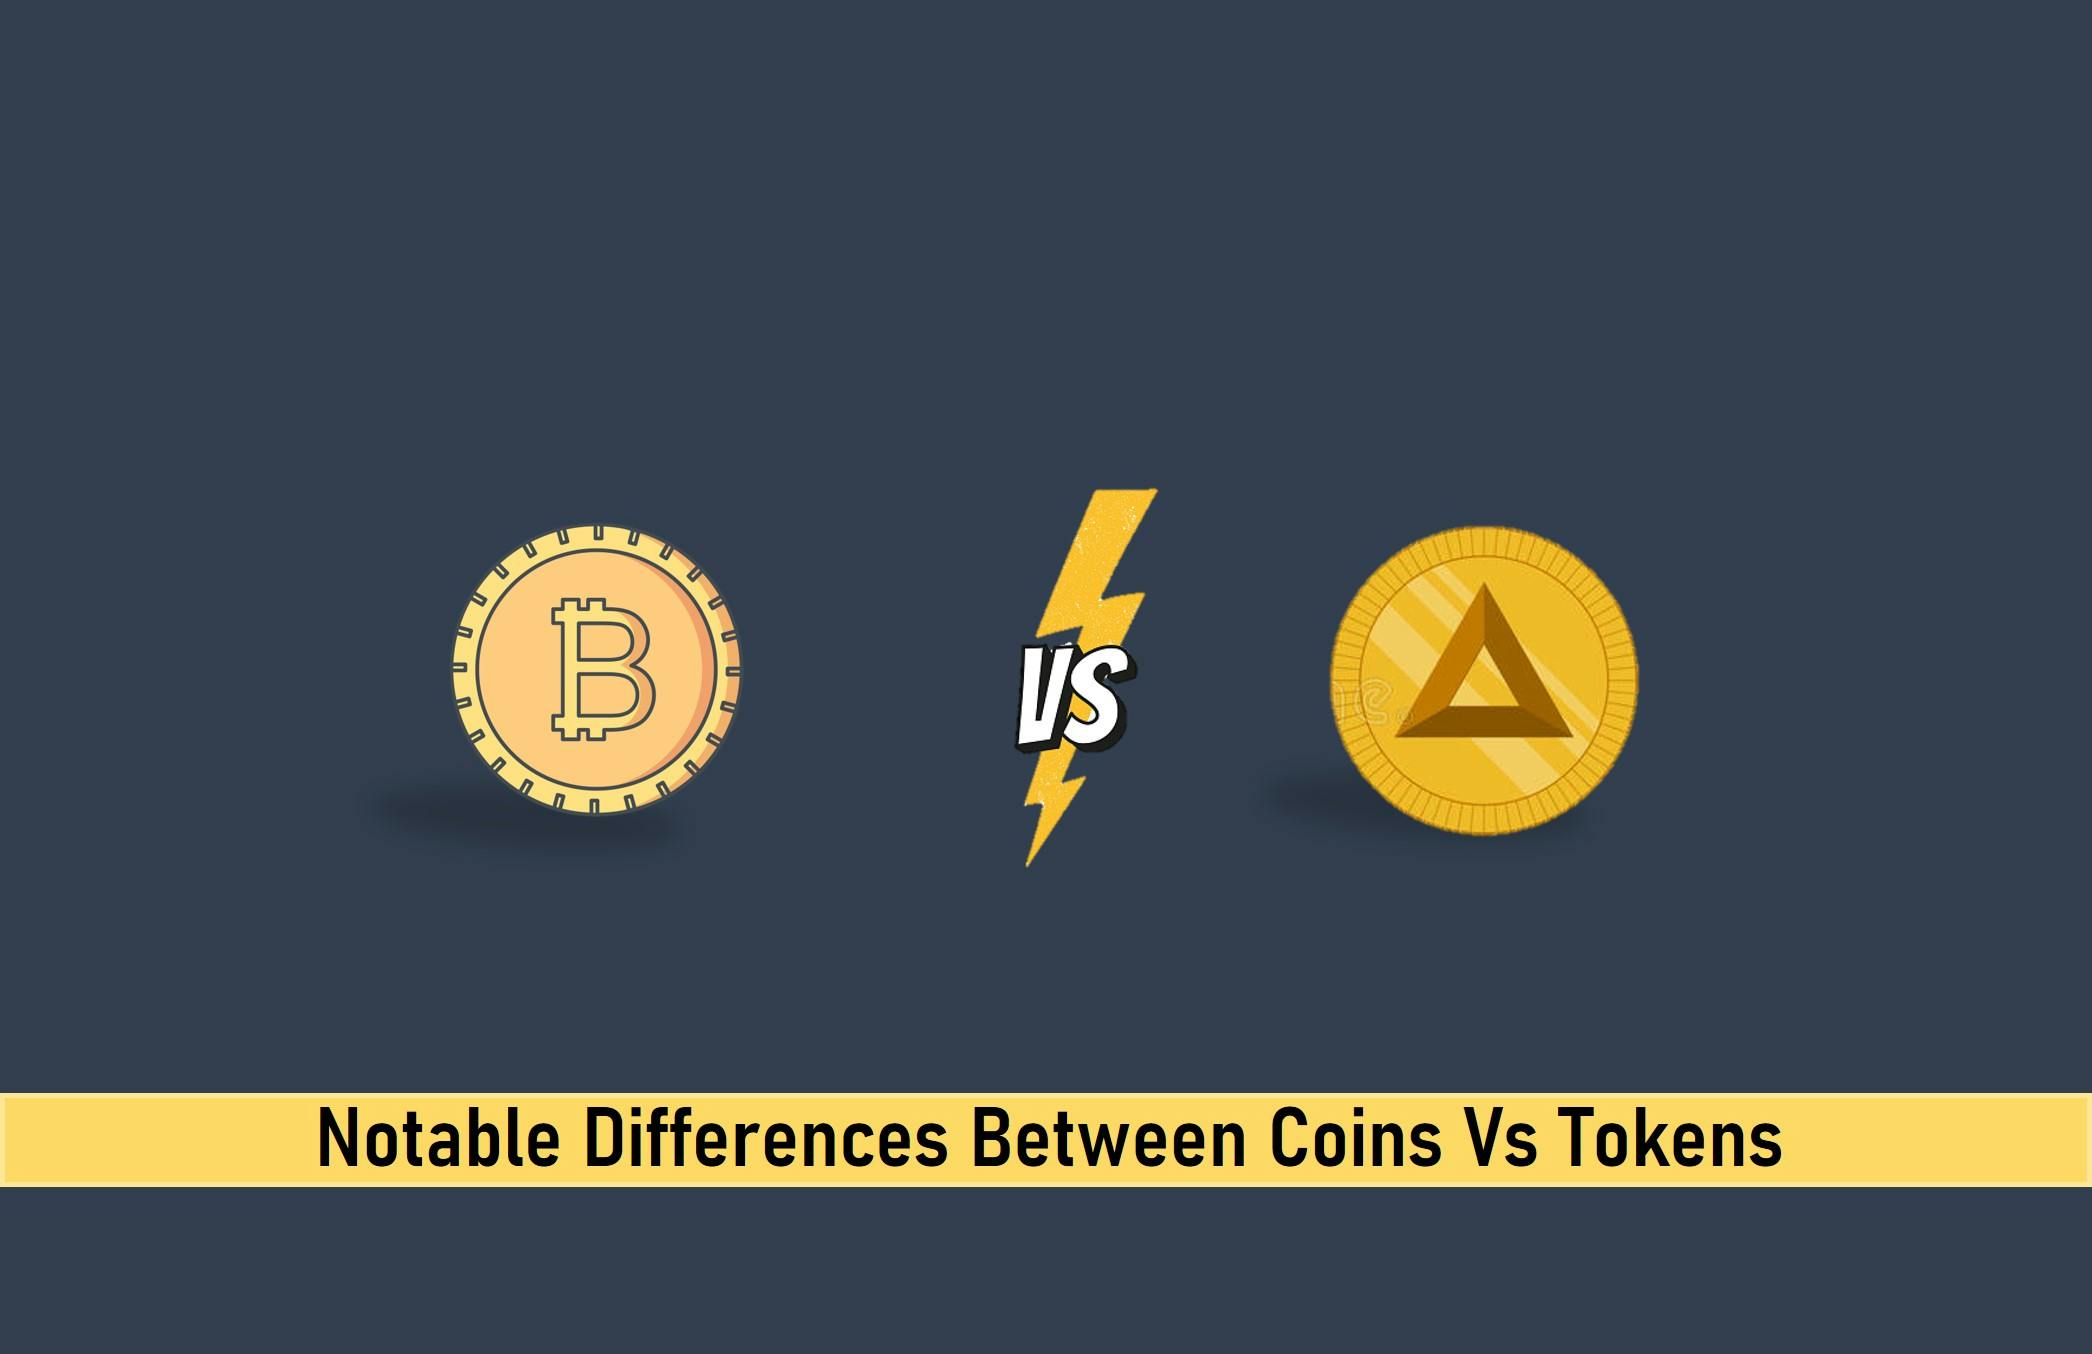 Notable Differences Between Coins Vs Tokens